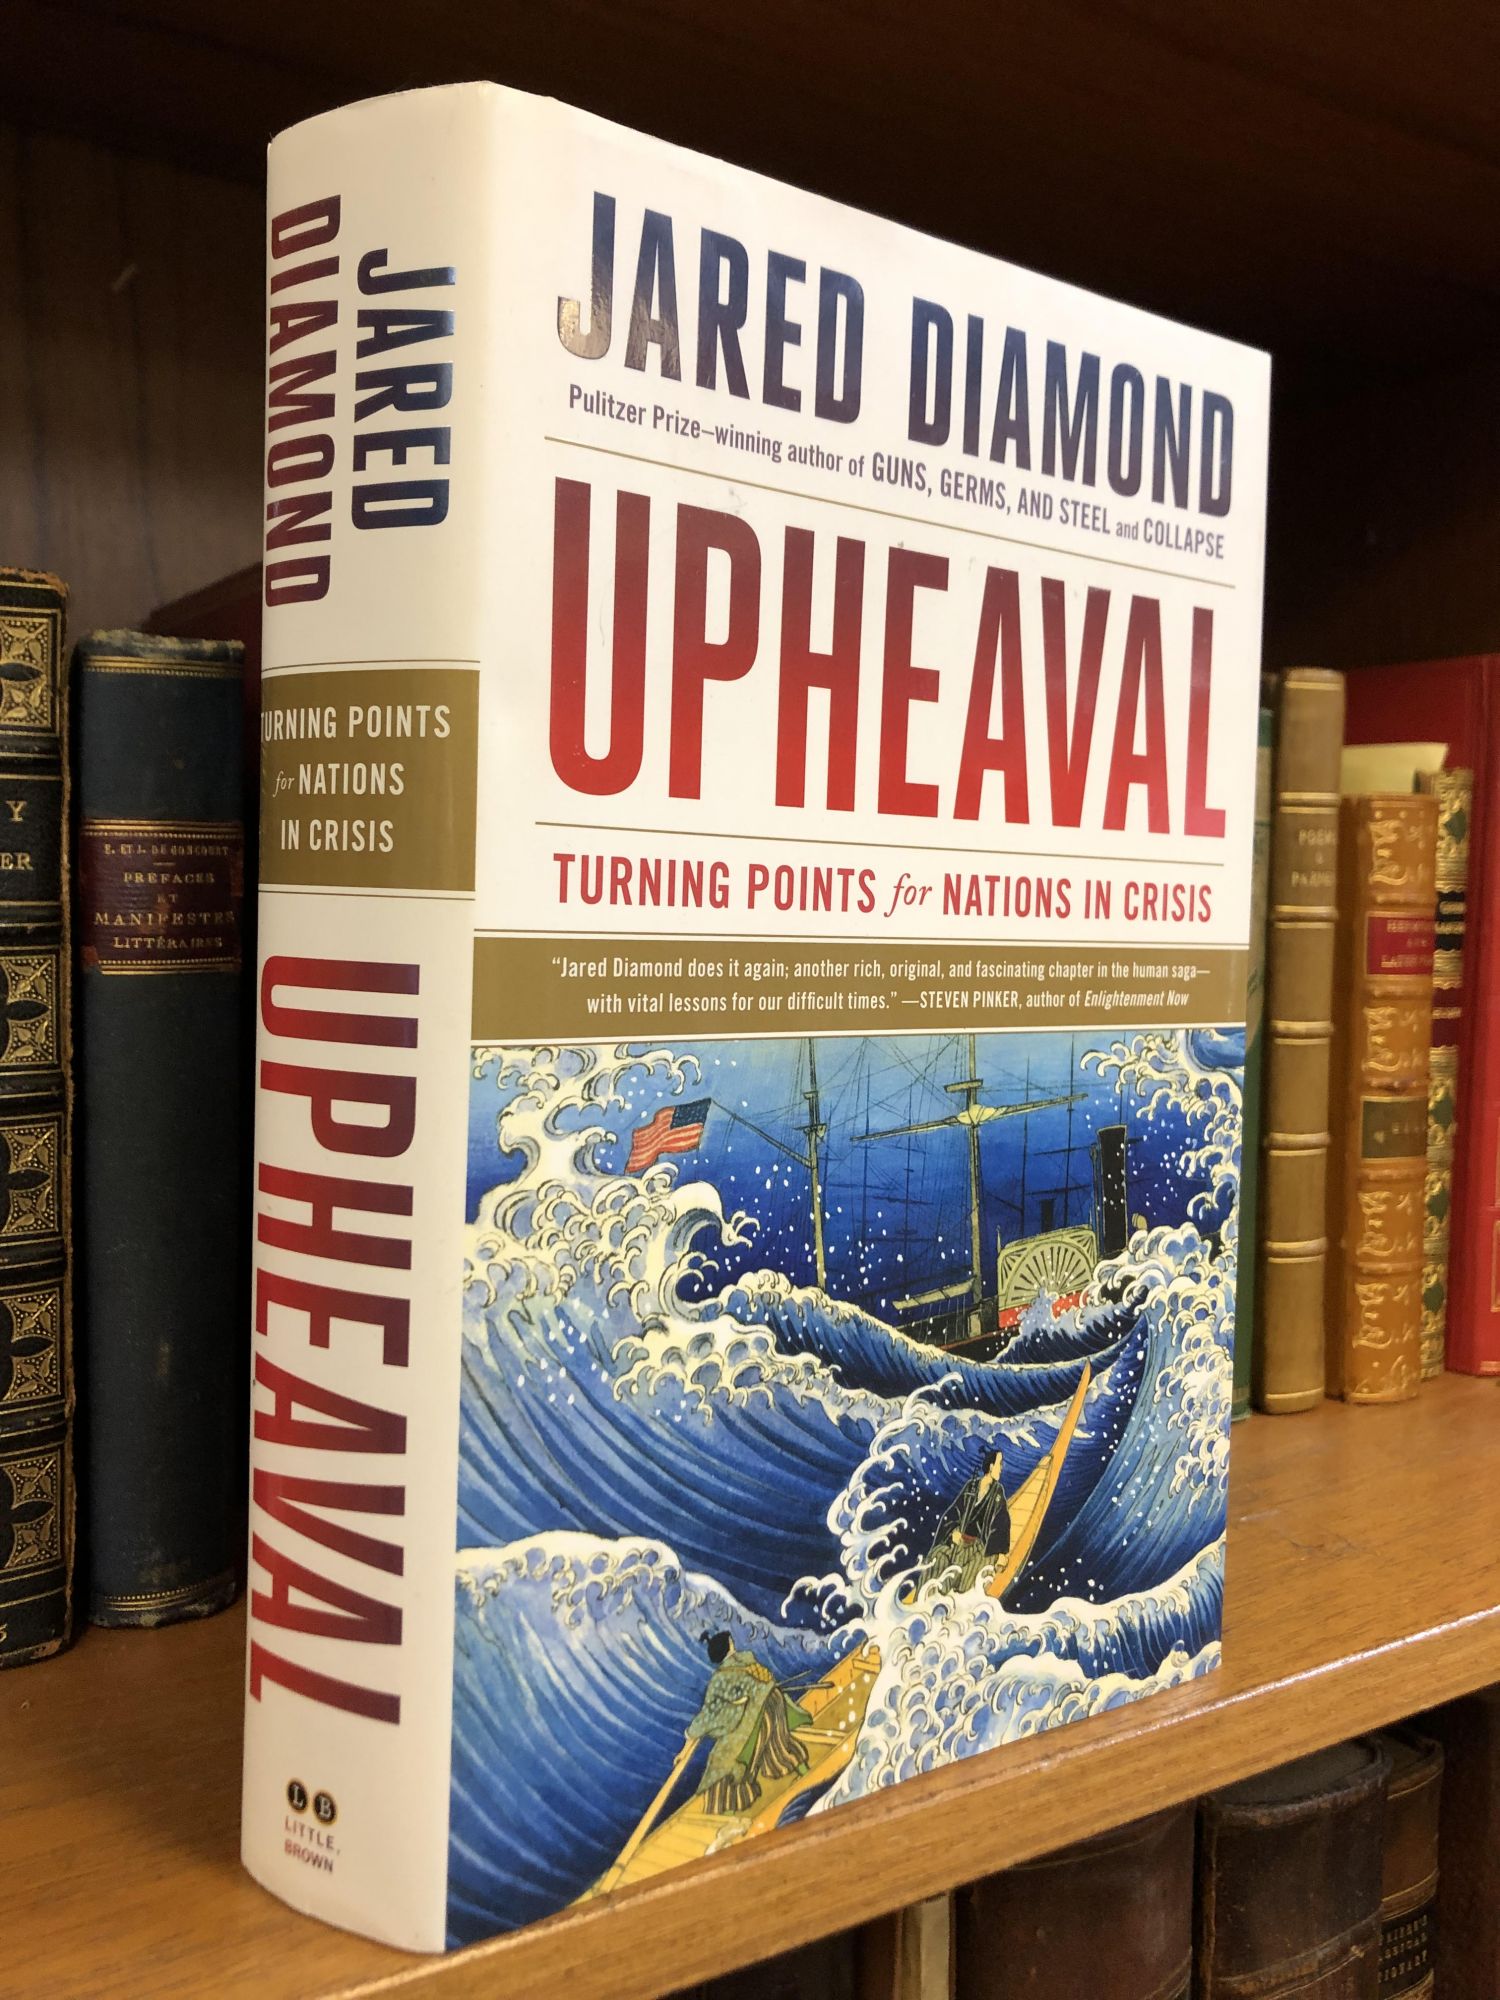 CRISIS　IN　First　Diamond　UPHEAVAL:　Edition,　First　Printing　SIGNED　TURNING　NATIONS　FOR　POINTS　Jared